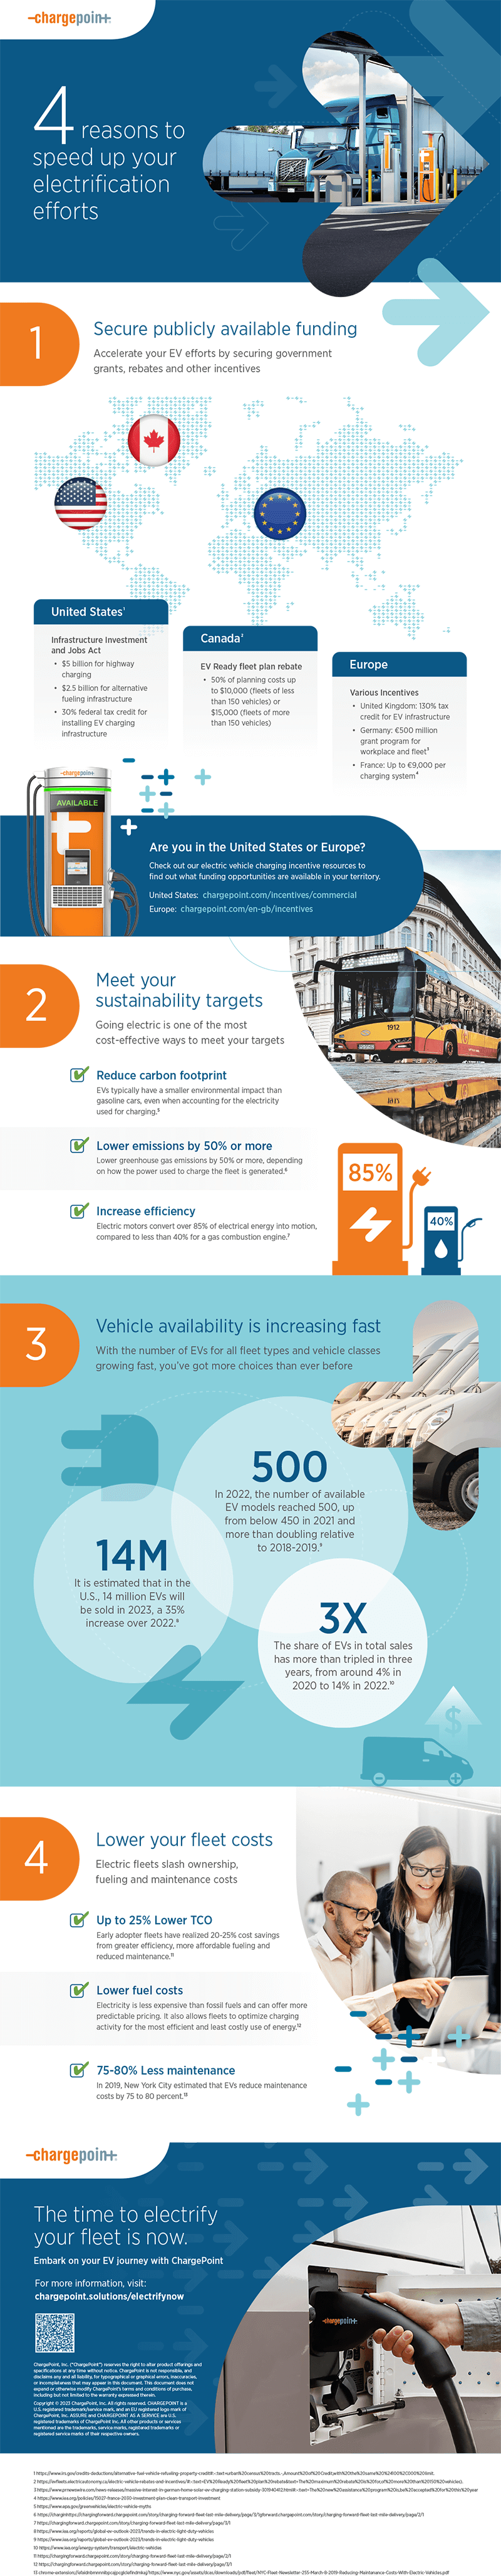 4 reasons to speed up your electrification efforts infographic